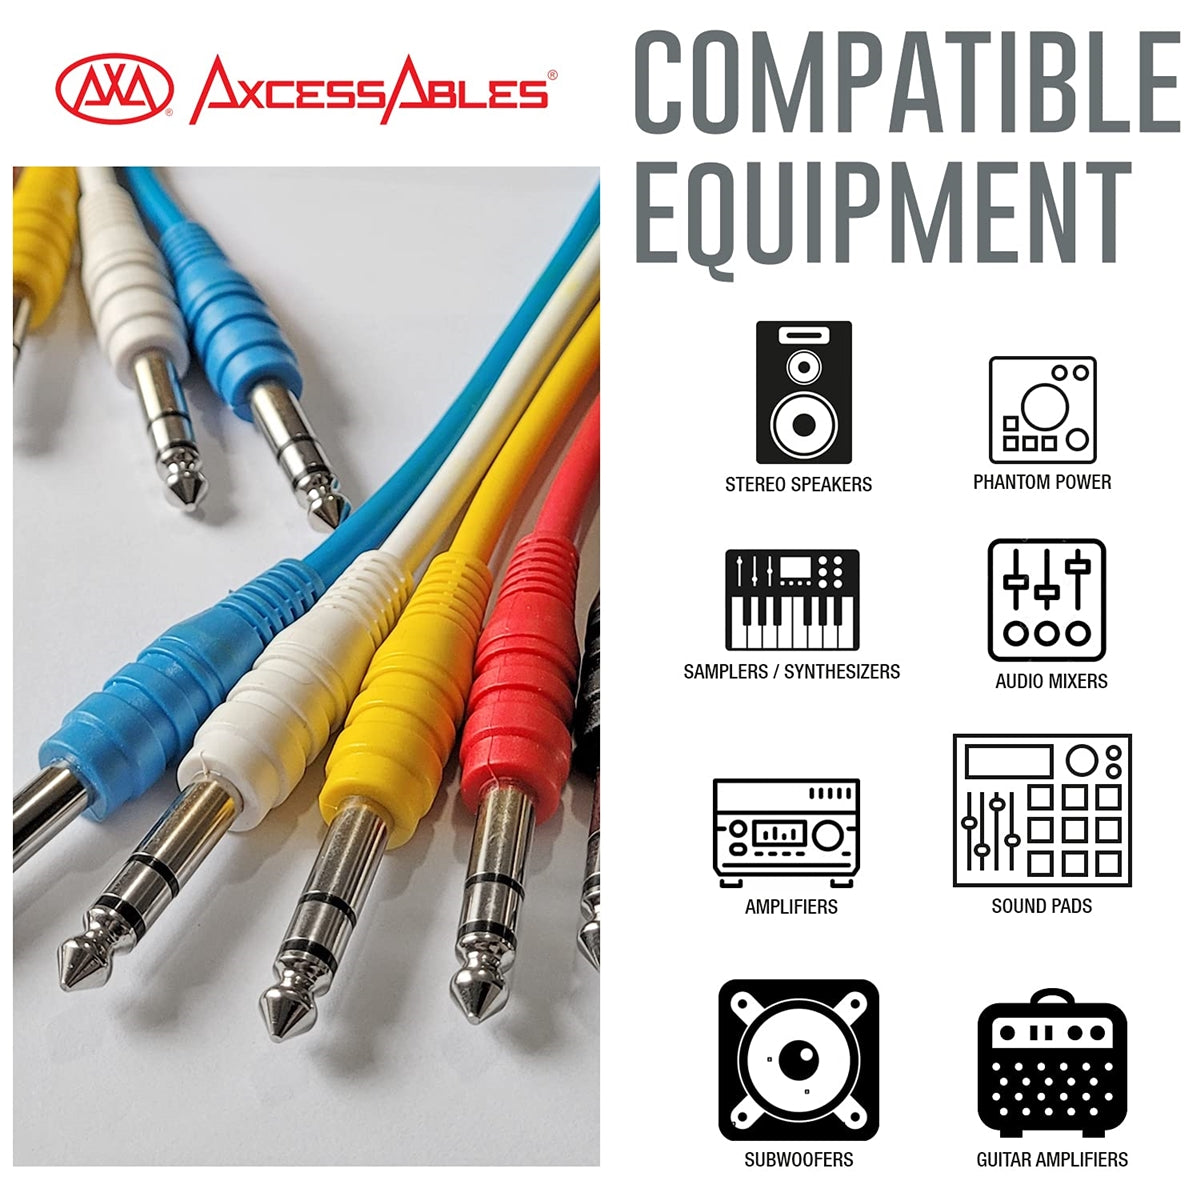 AxcessAbles 1/4-inch (6.35mm) TRS to 1/4-inch (6.35mm) TRS Multi-Color Balanced Stereo Patch Cables 6-Pack (3ft) Outboard Gear & Patchbay Studio Cables External Effects Digital Analog Effects